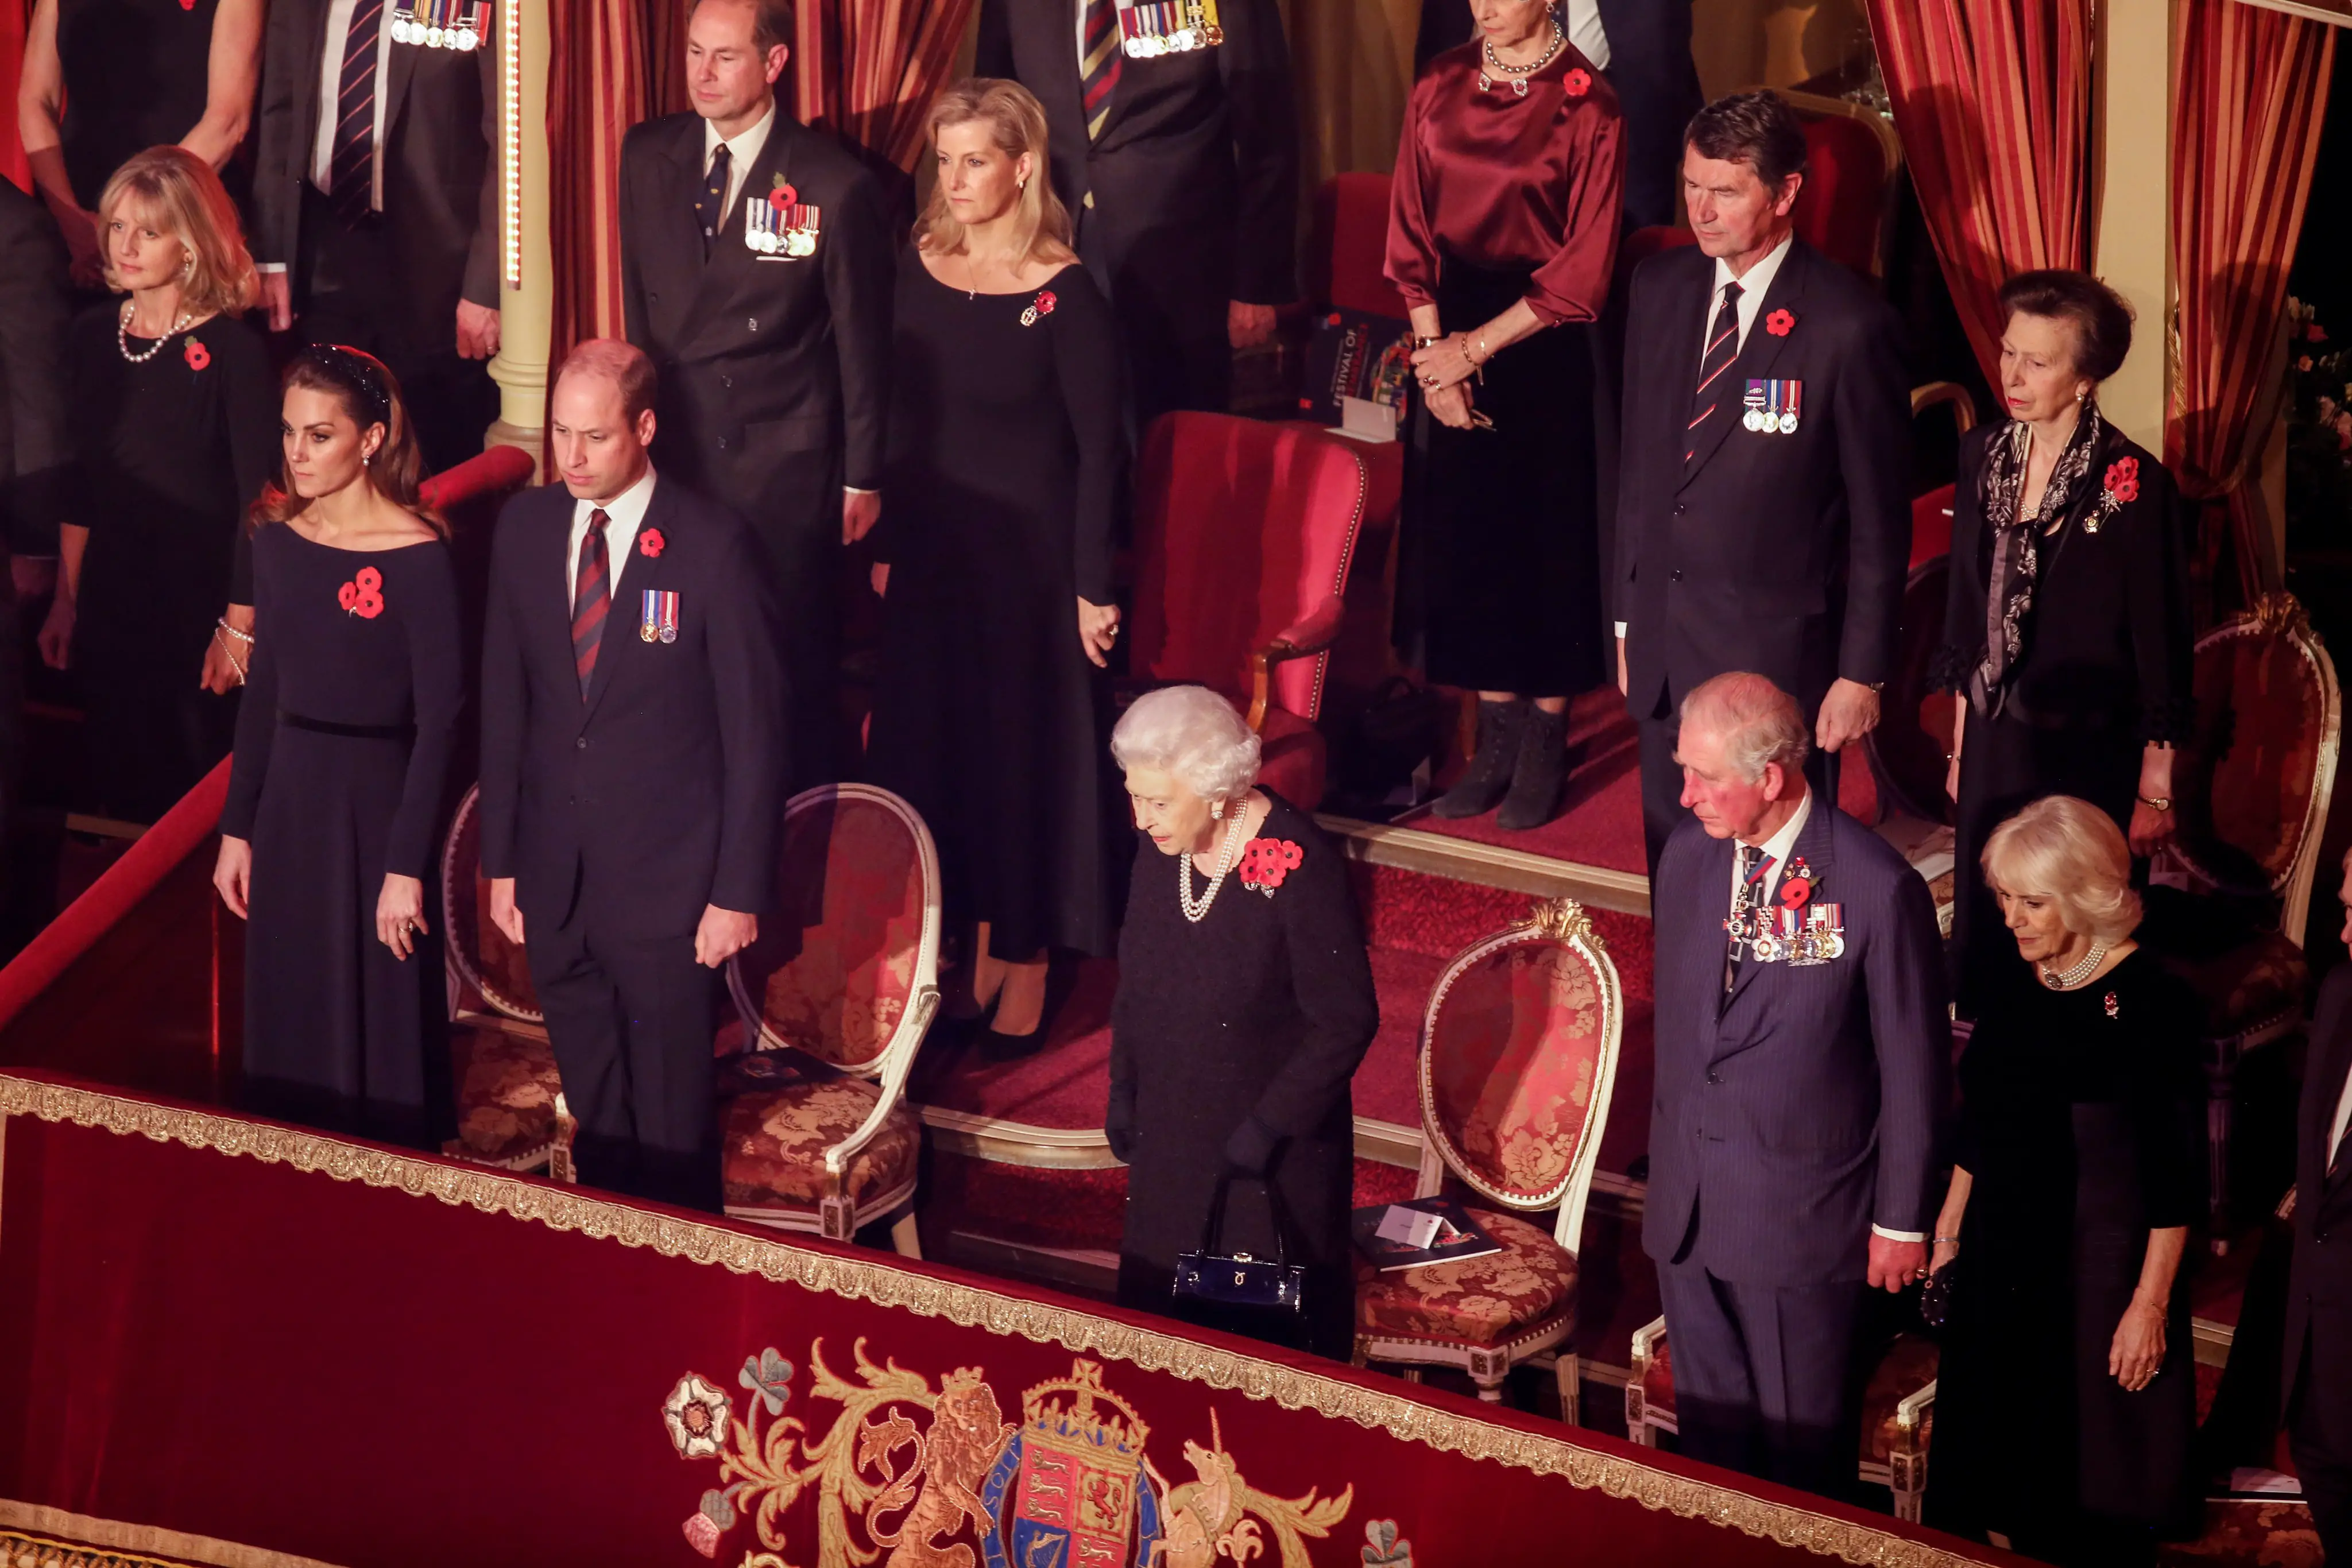 The Duke and Duchess of Cambridge attended Royal Festival of Remembrance with Royal Family